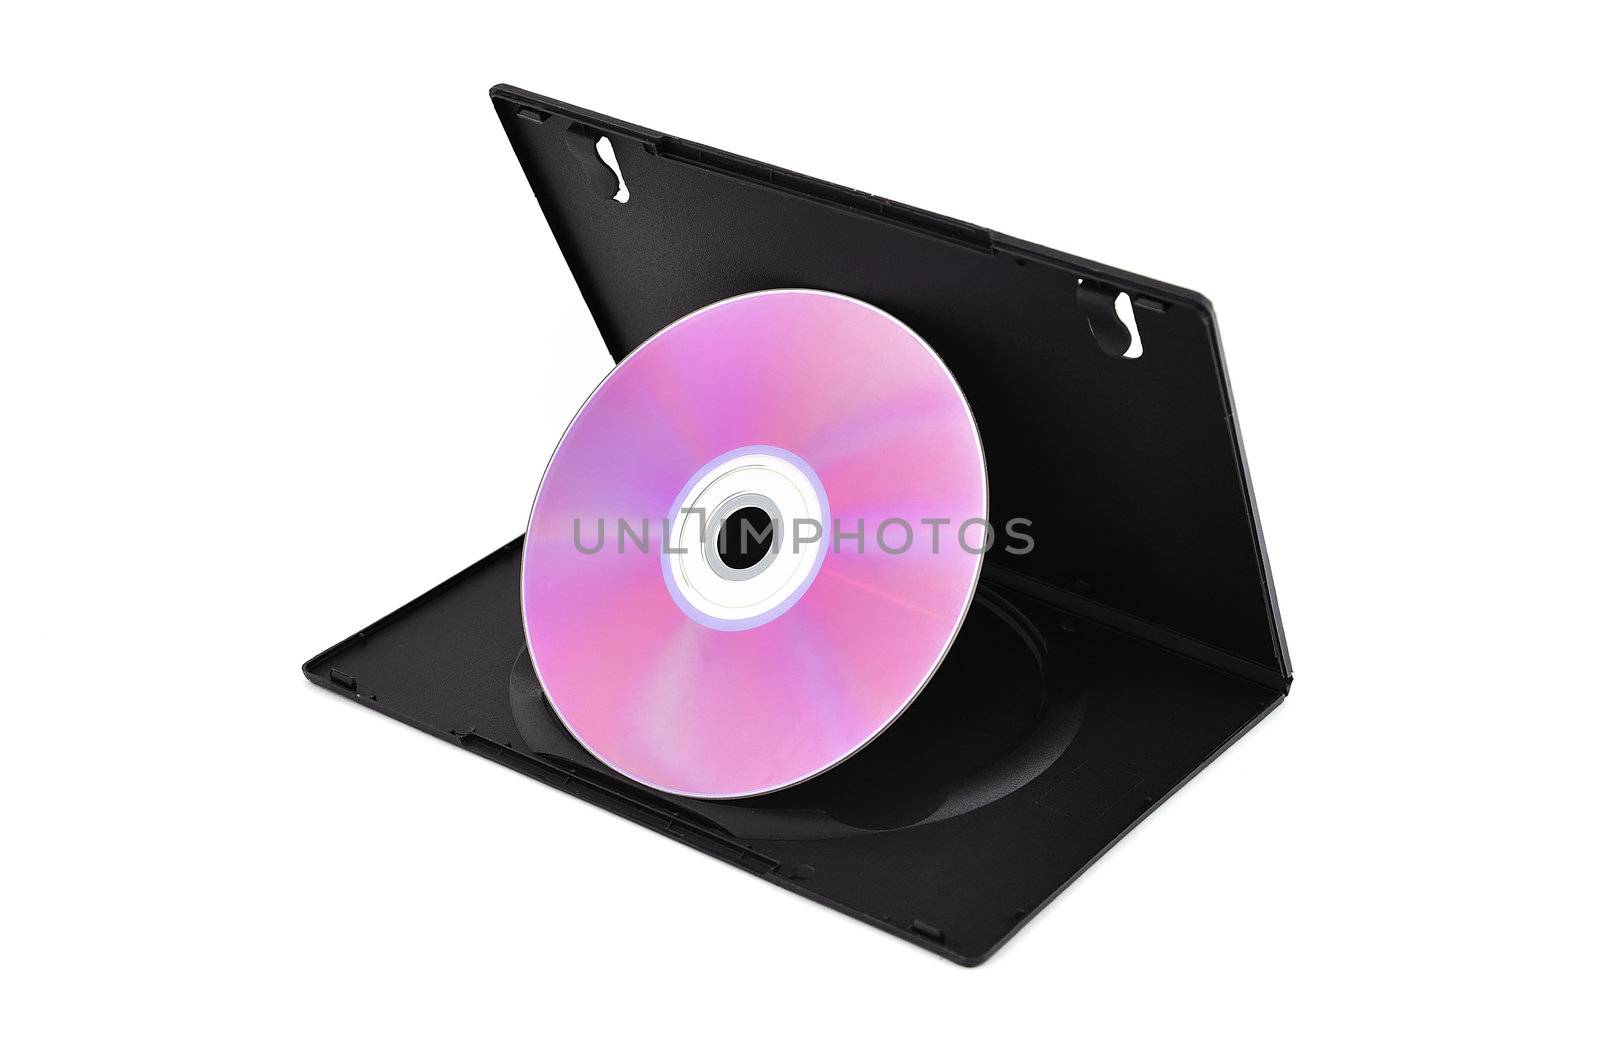 dvd optical drive and box on a white background